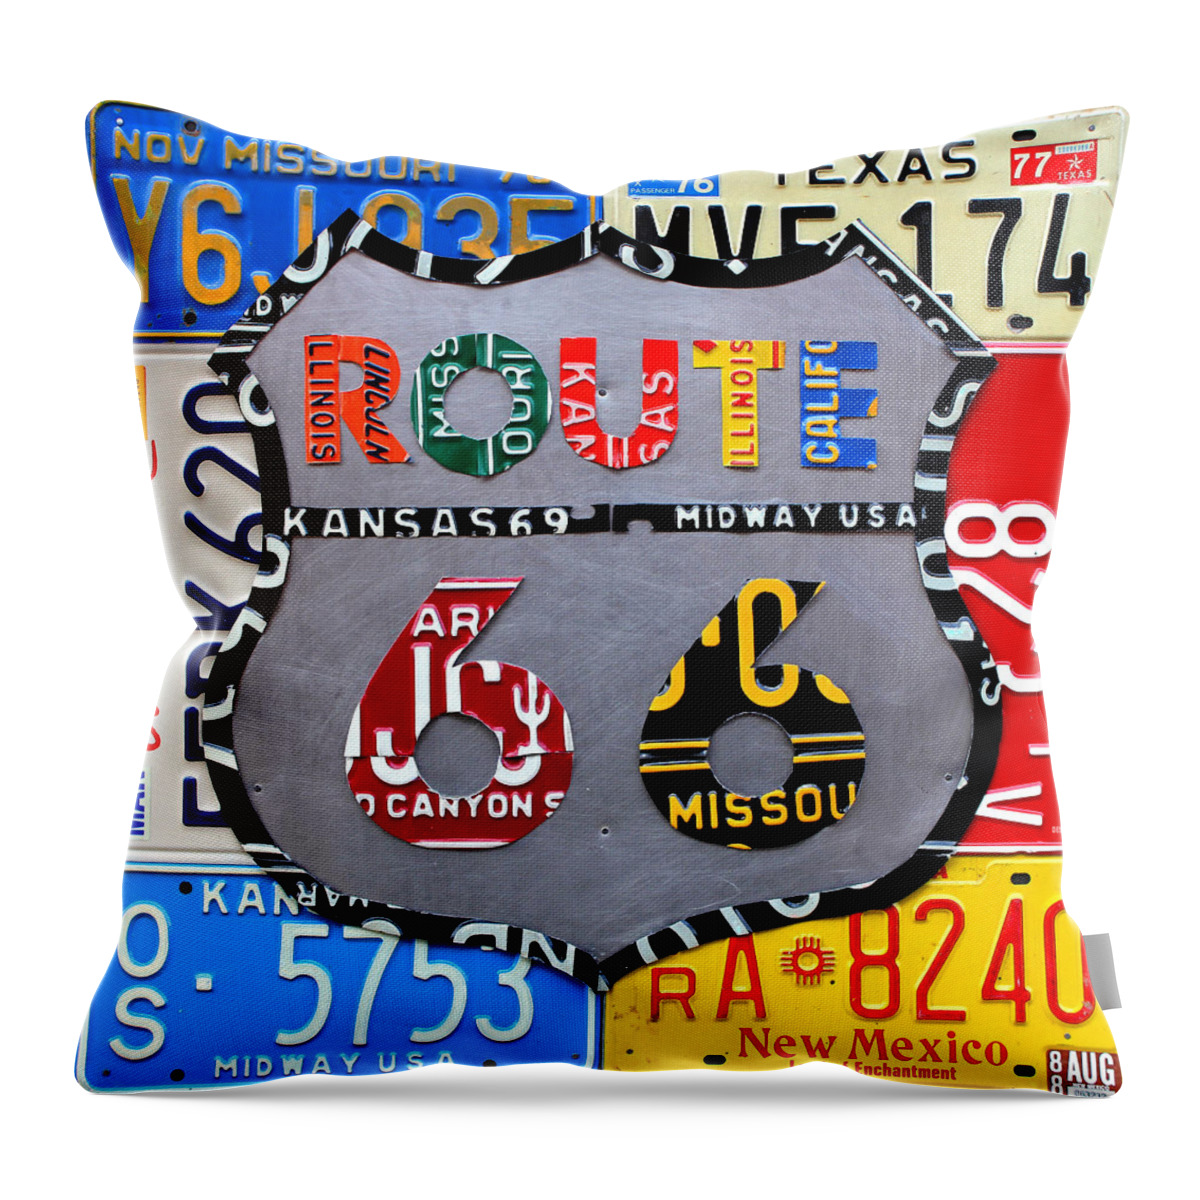 Route 66 Highway Road Sign License Plate Art Travel License Plate Map Throw Pillow featuring the mixed media Route 66 Highway Road Sign License Plate Art by Design Turnpike